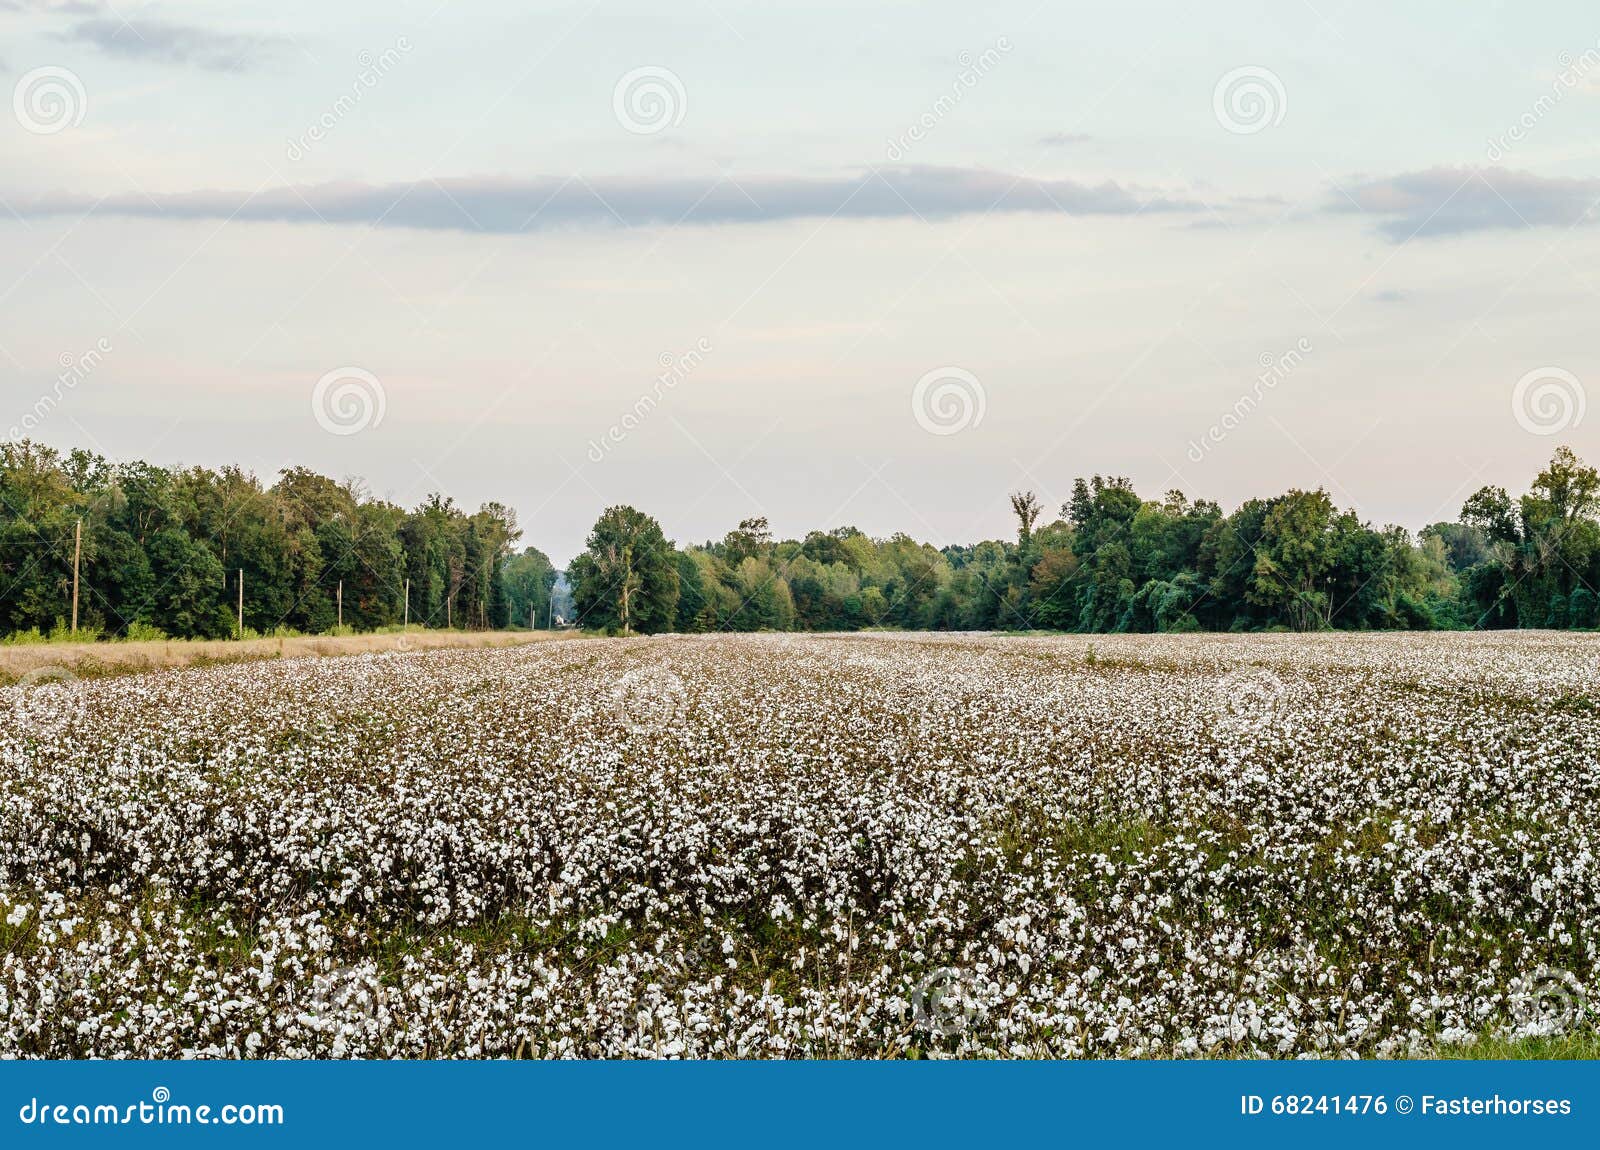 63,107 Cotton Field Royalty-Free Photos and Stock Images